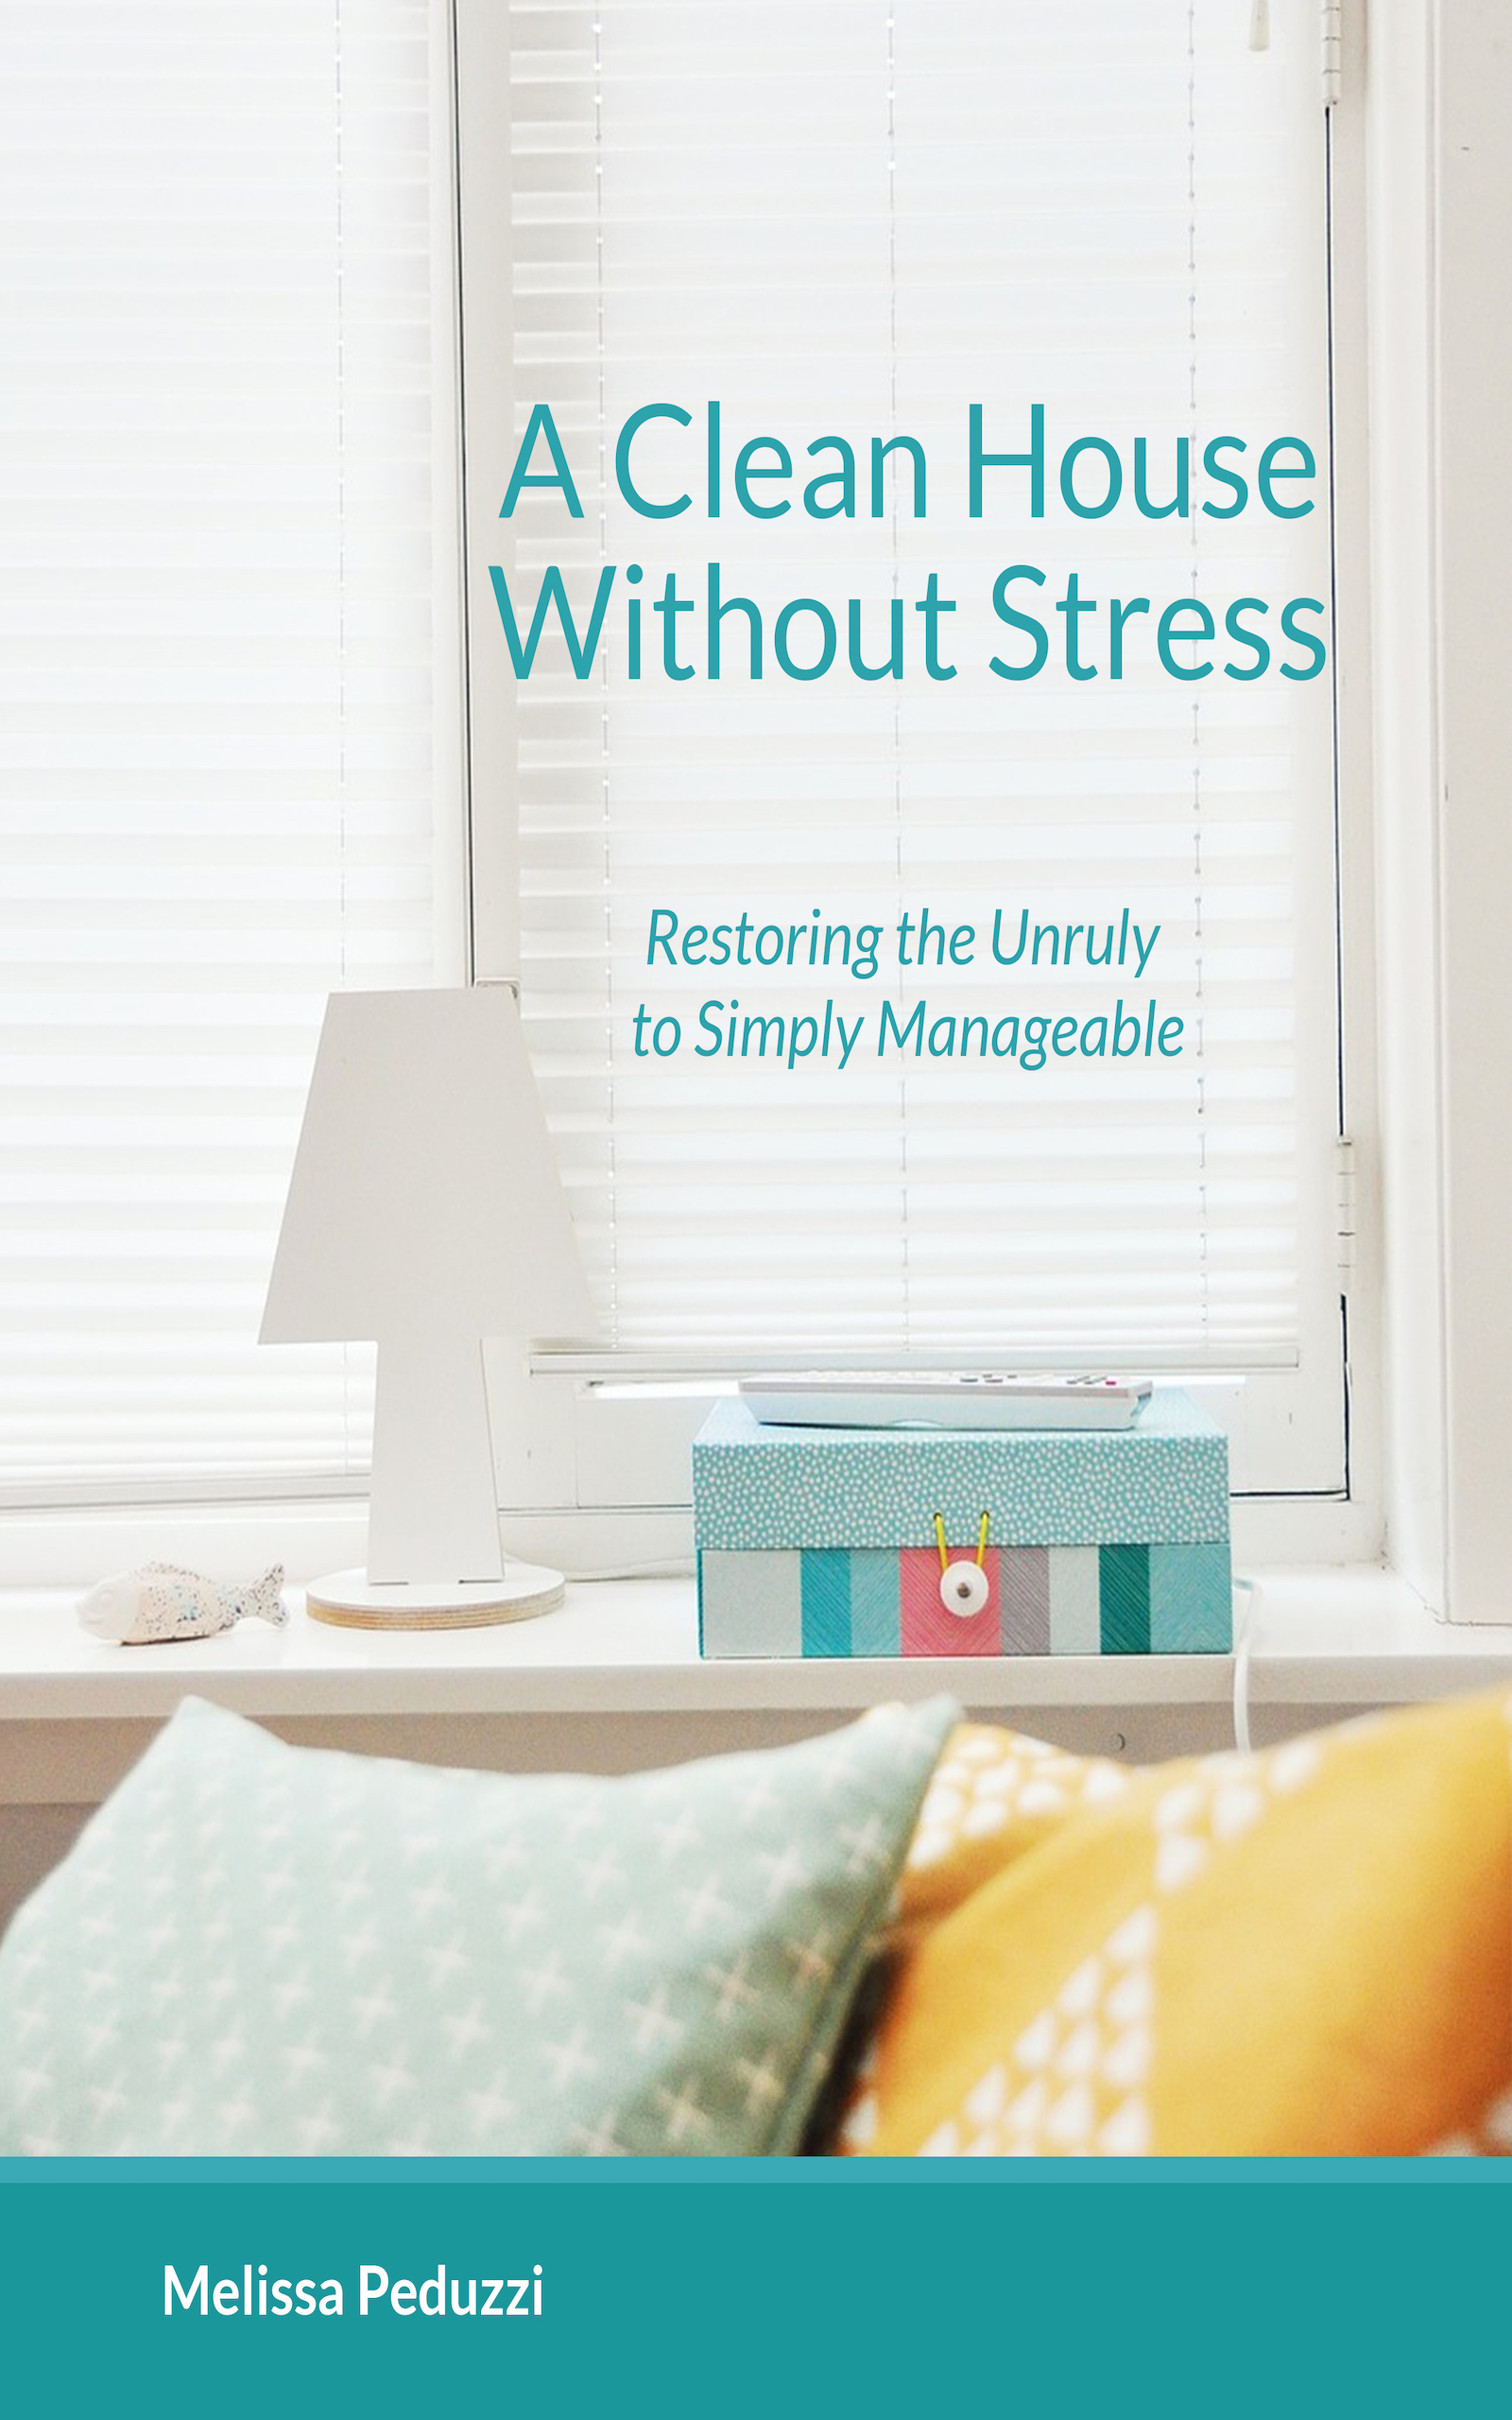 FREE: A Clean House Without Stress: Restoring the Unruly to Simply Manageable by Melissa Peduzzi